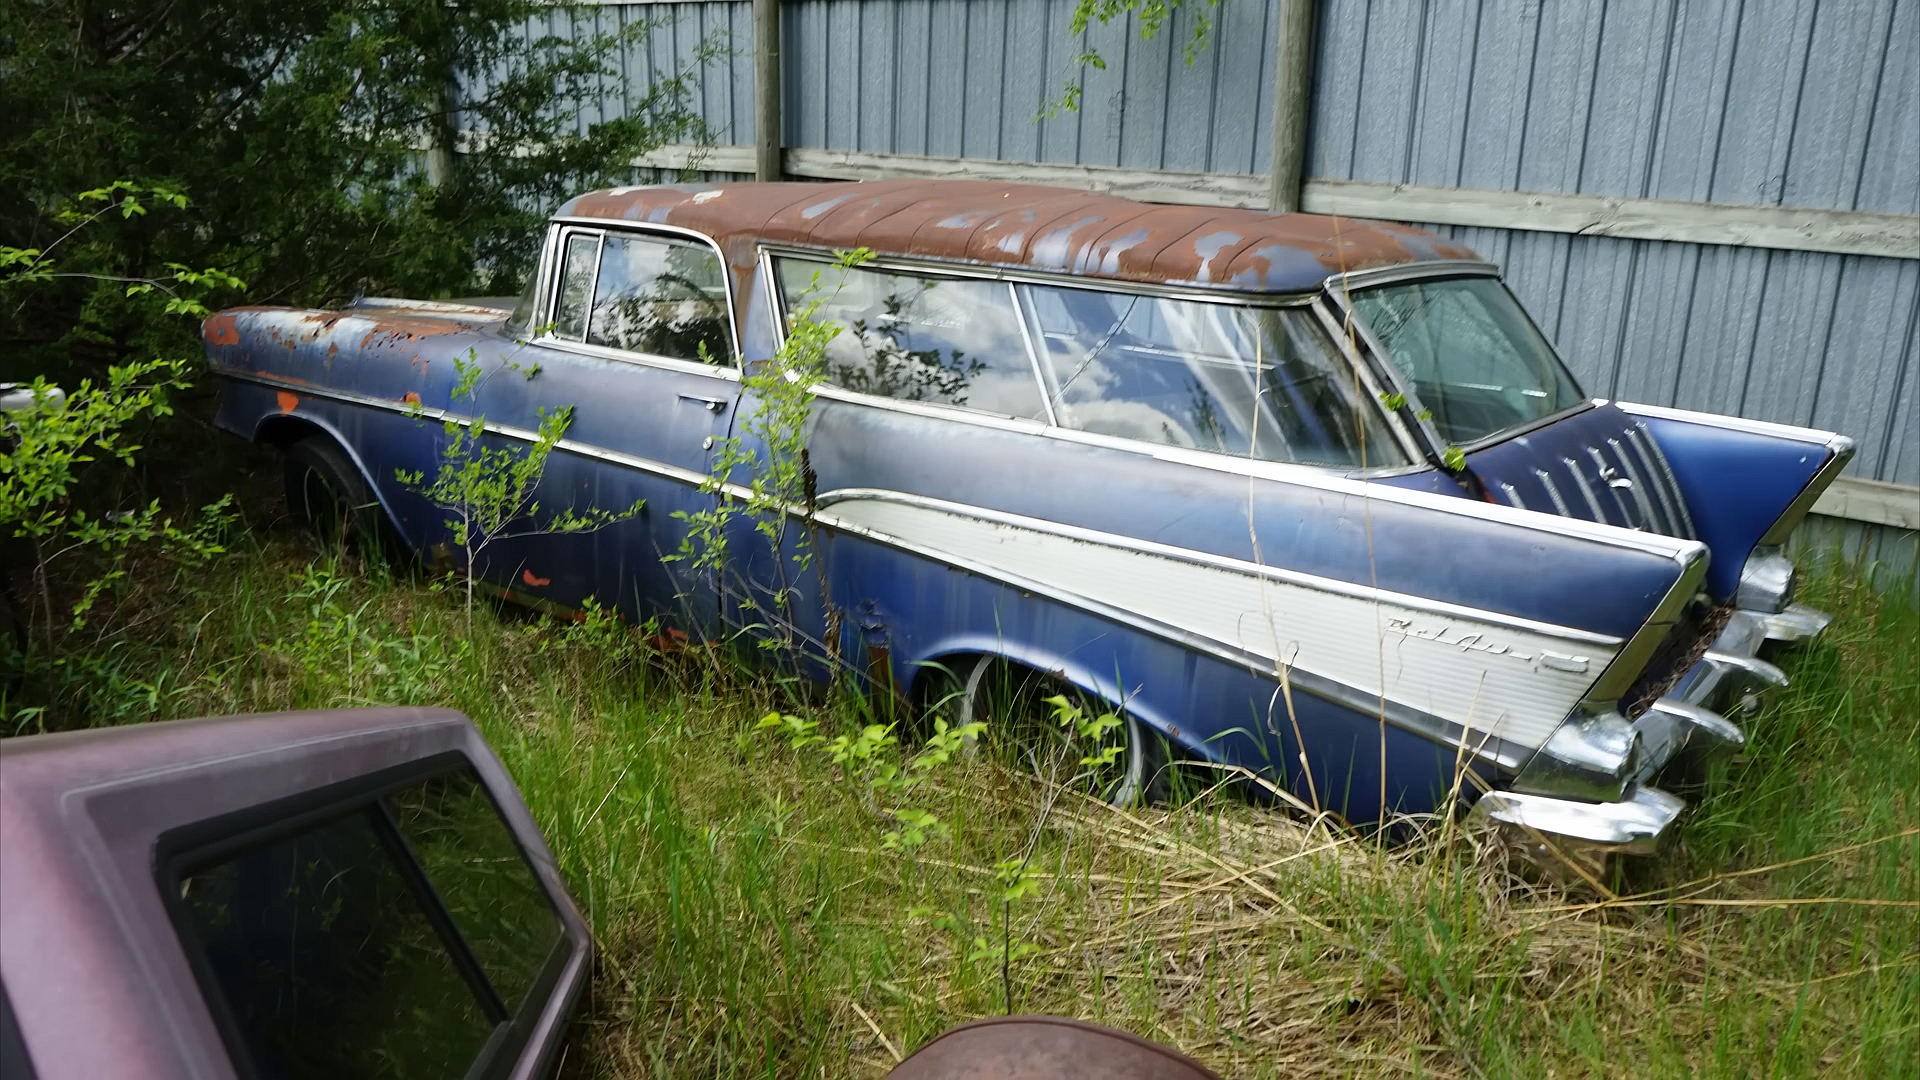 Chevrolet Nomad Is A Rare Yard Find Begs To Be Restored